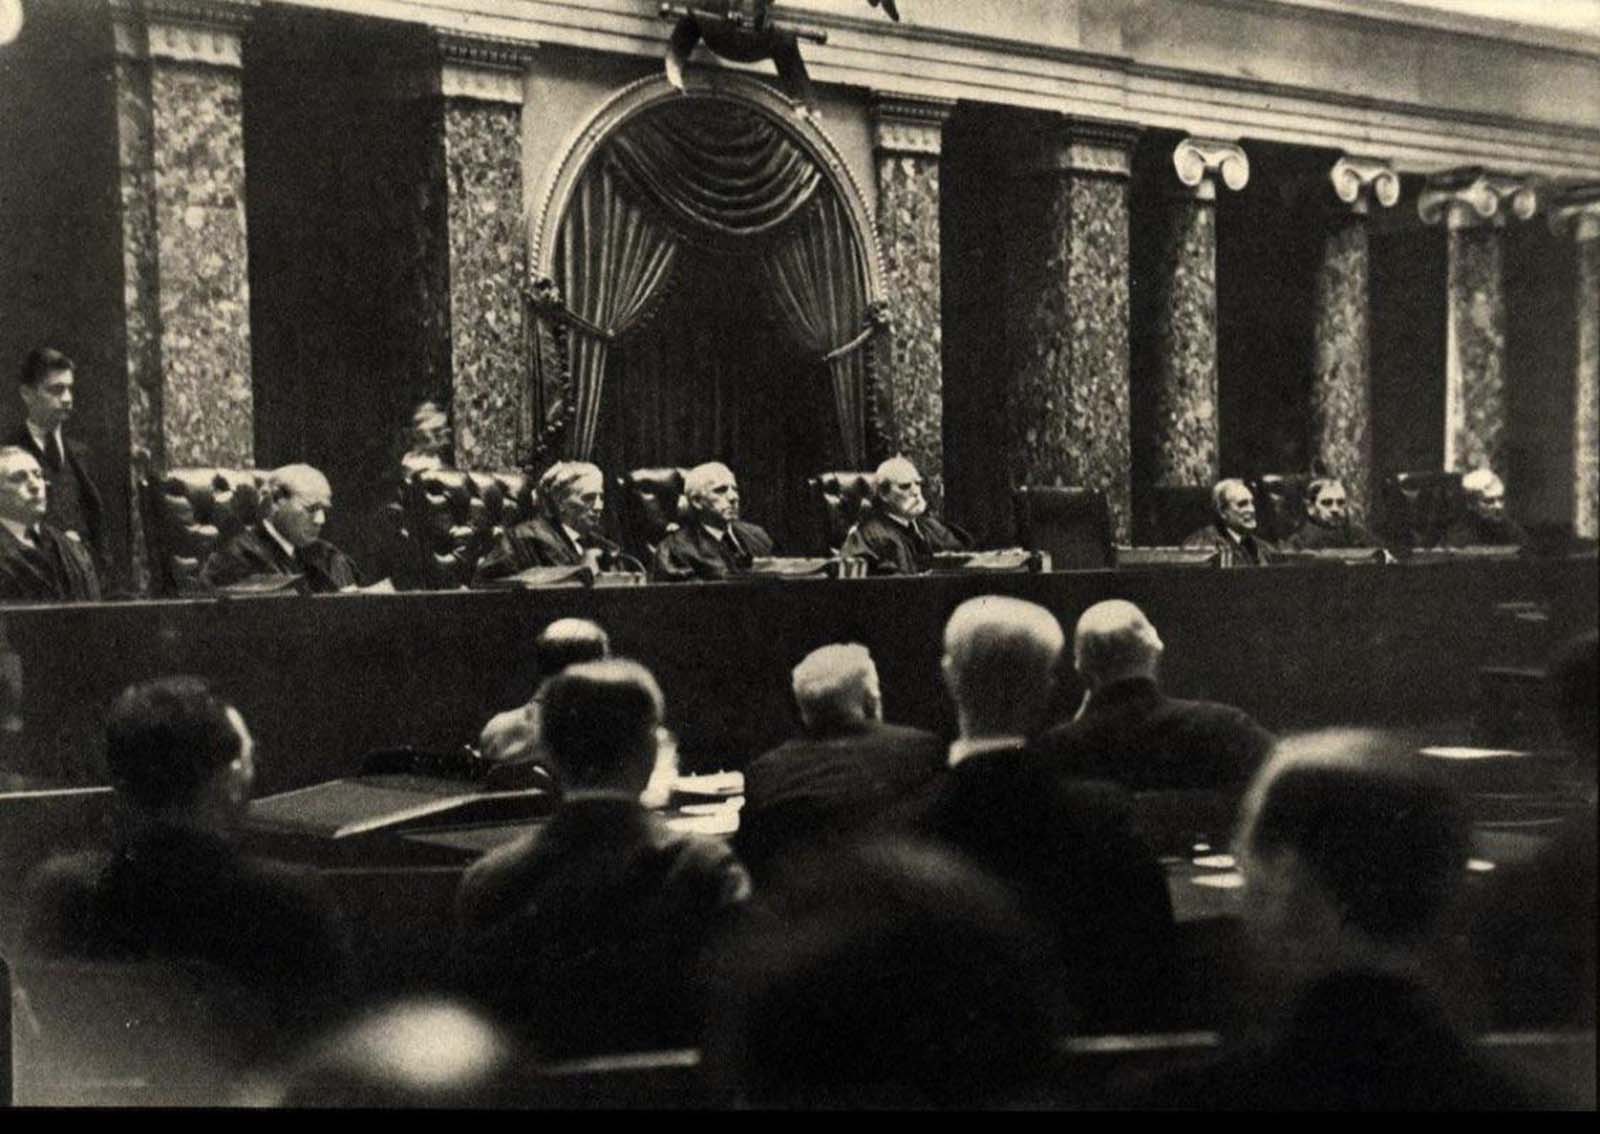 Illegal picture taken inside the US Supreme Court in 1932. Dr. Erich Salomon faked a broken arm so he could hide a camera in his cast.